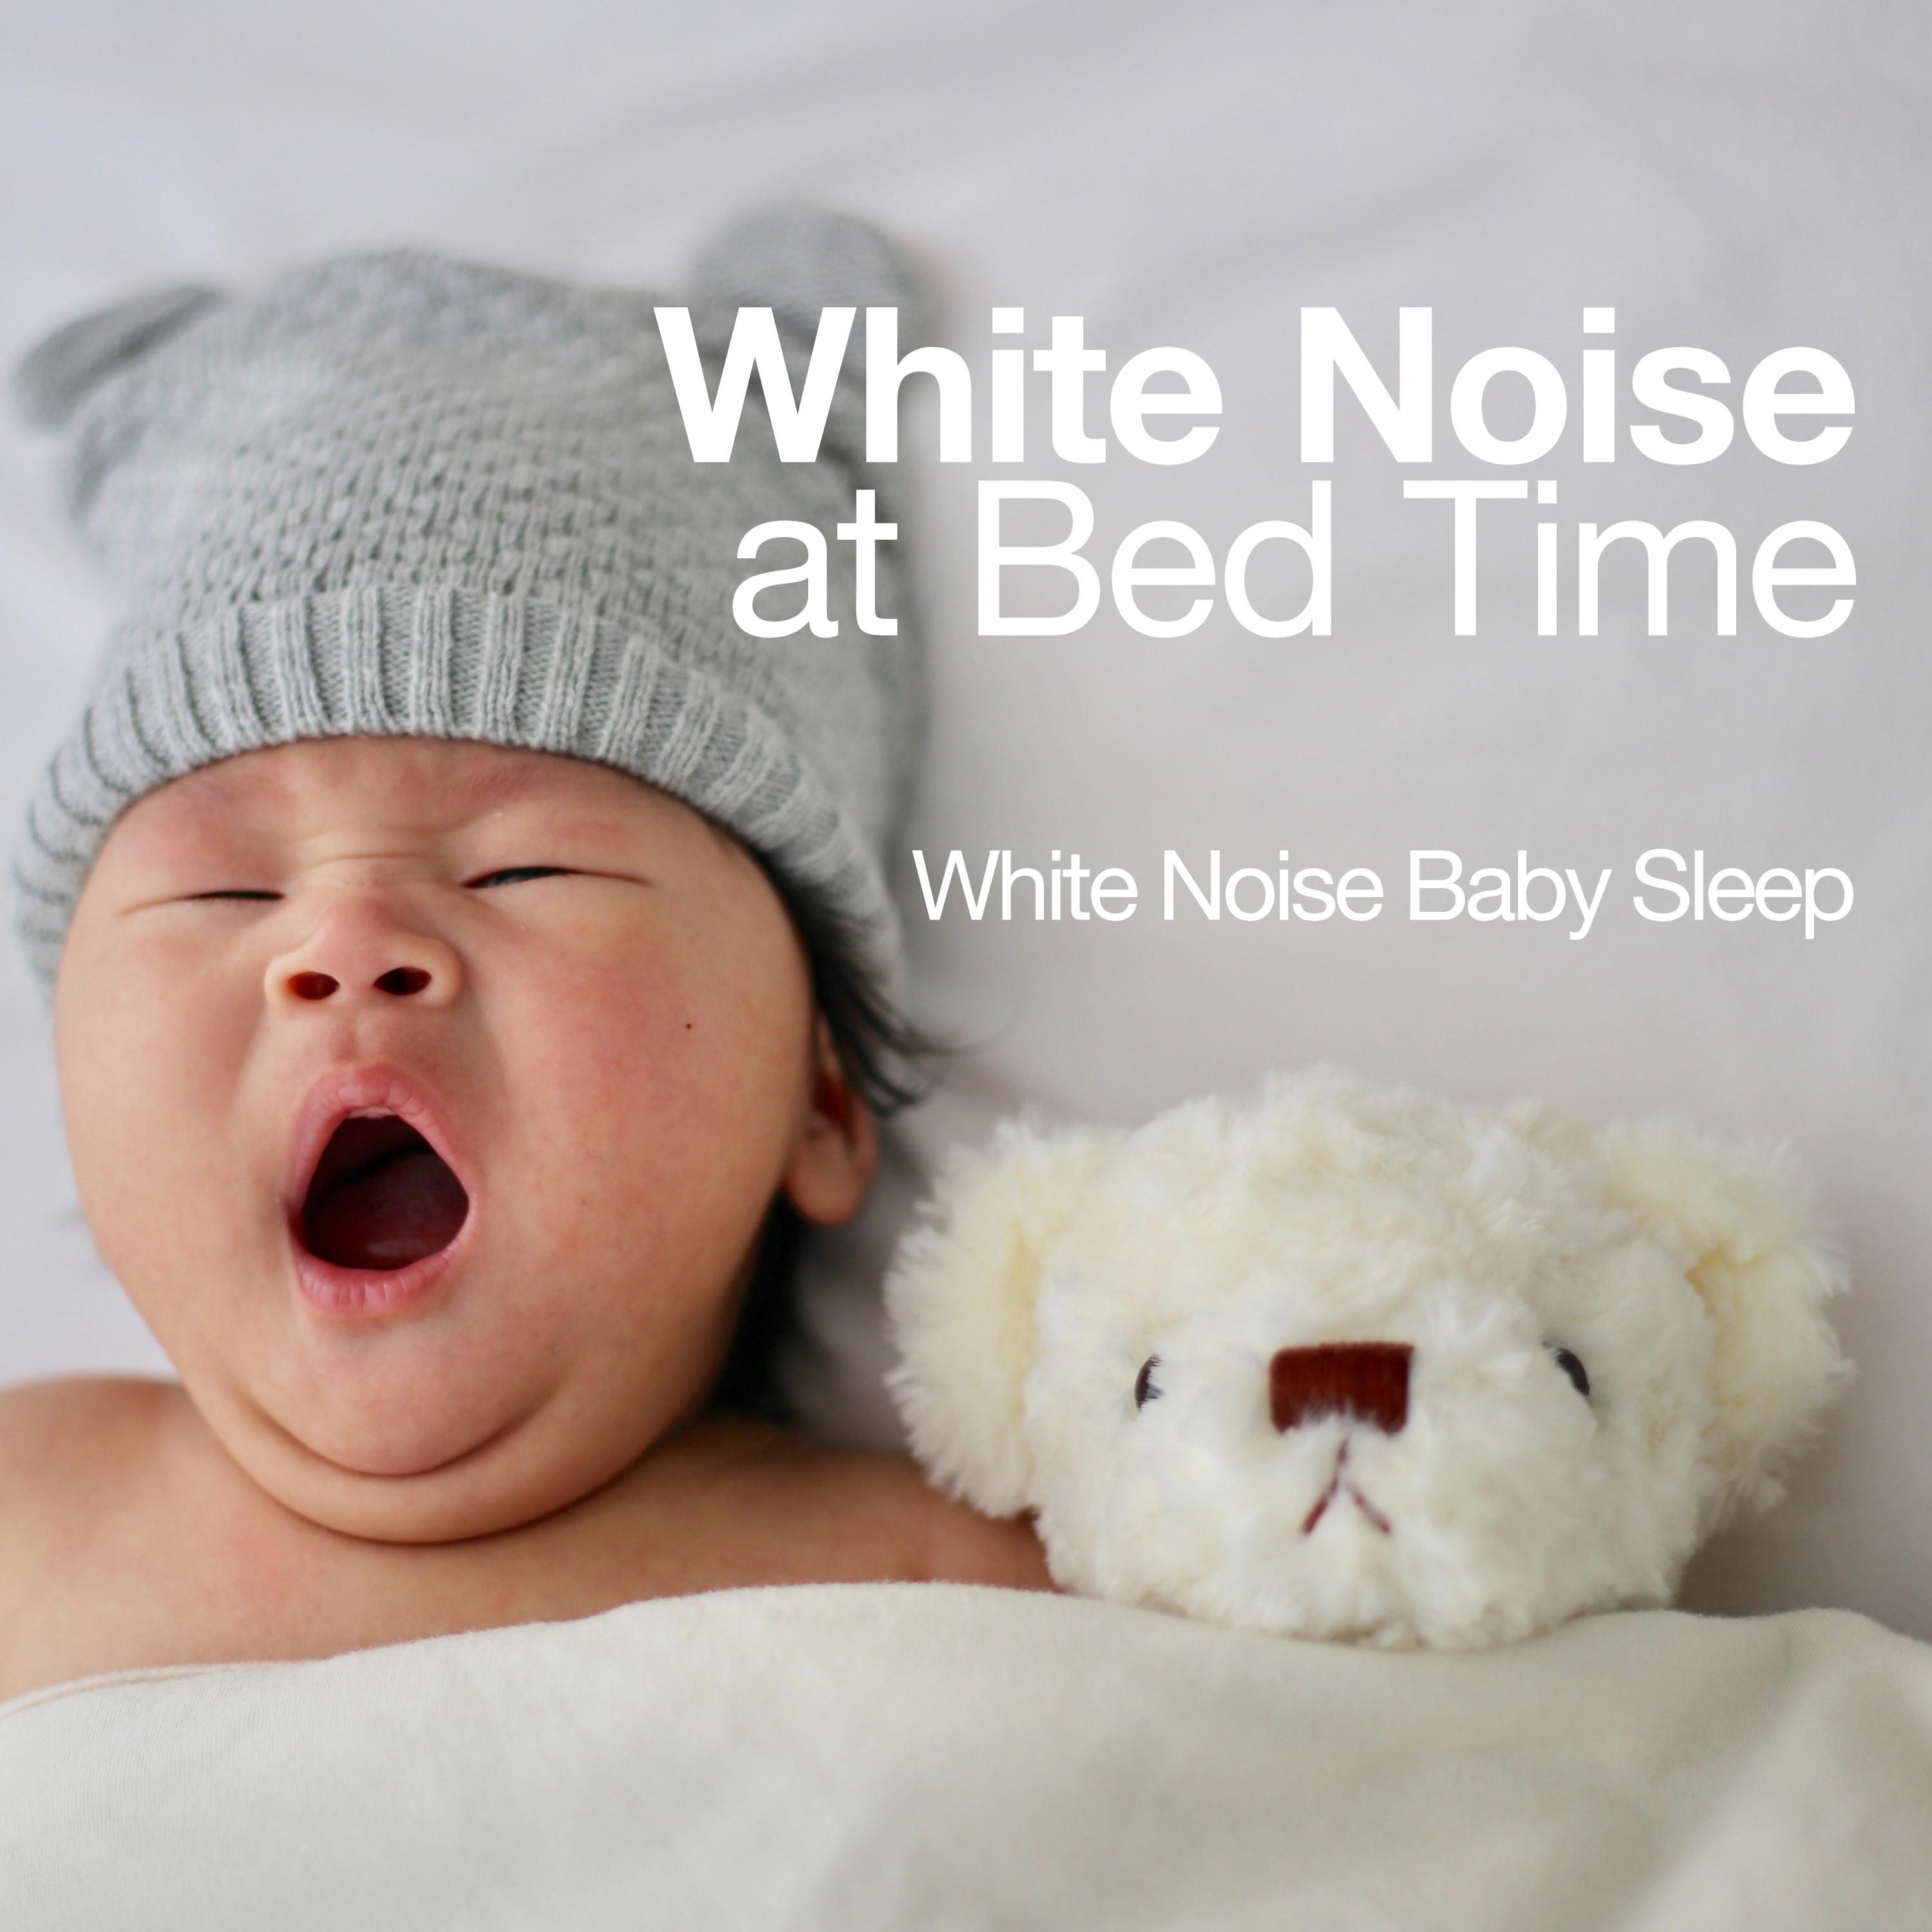 White Noise at Bed Time